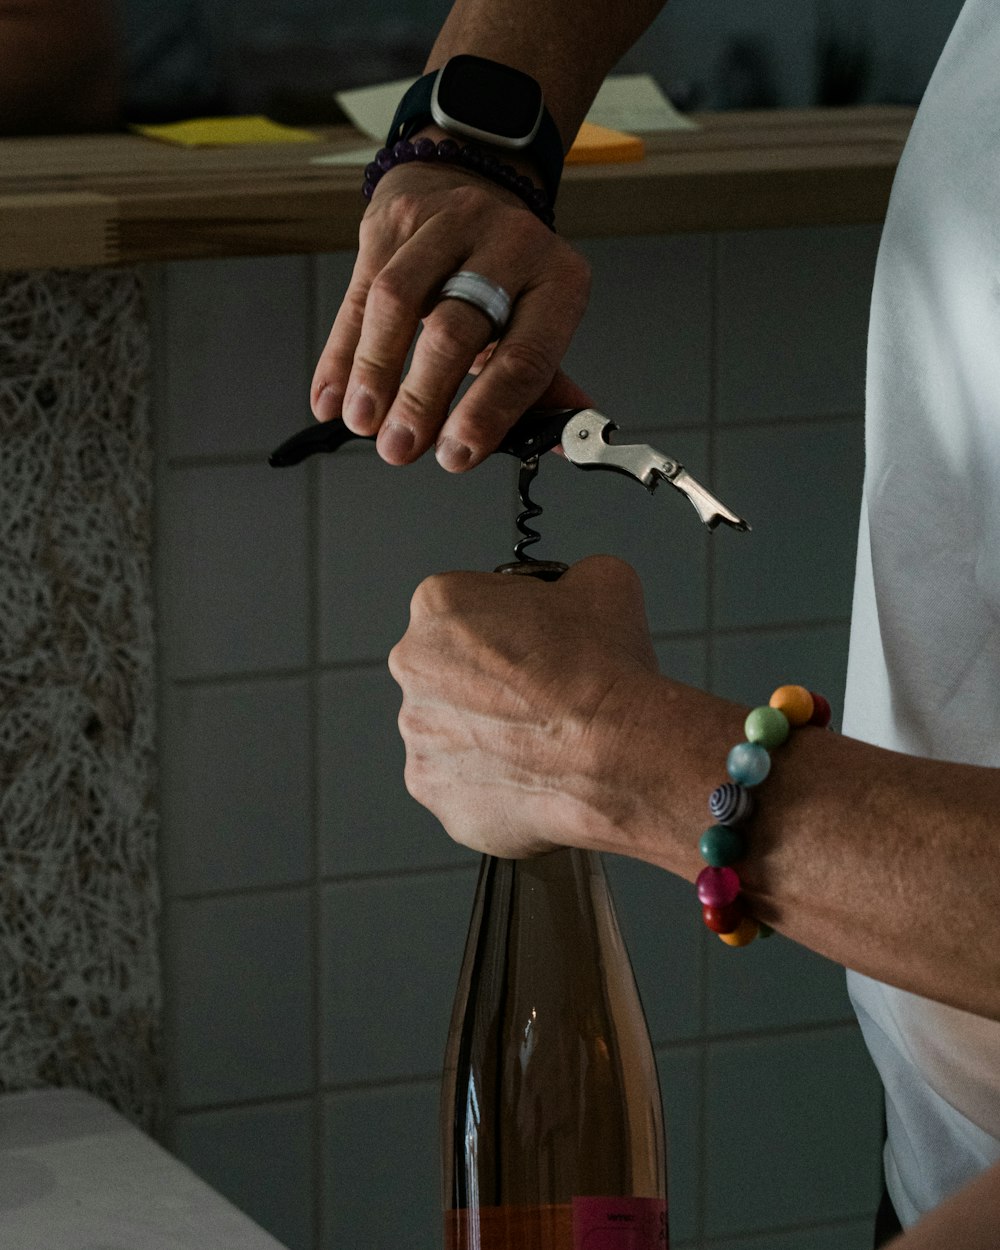 a person holding a wine bottle with a corkscrew attached to it